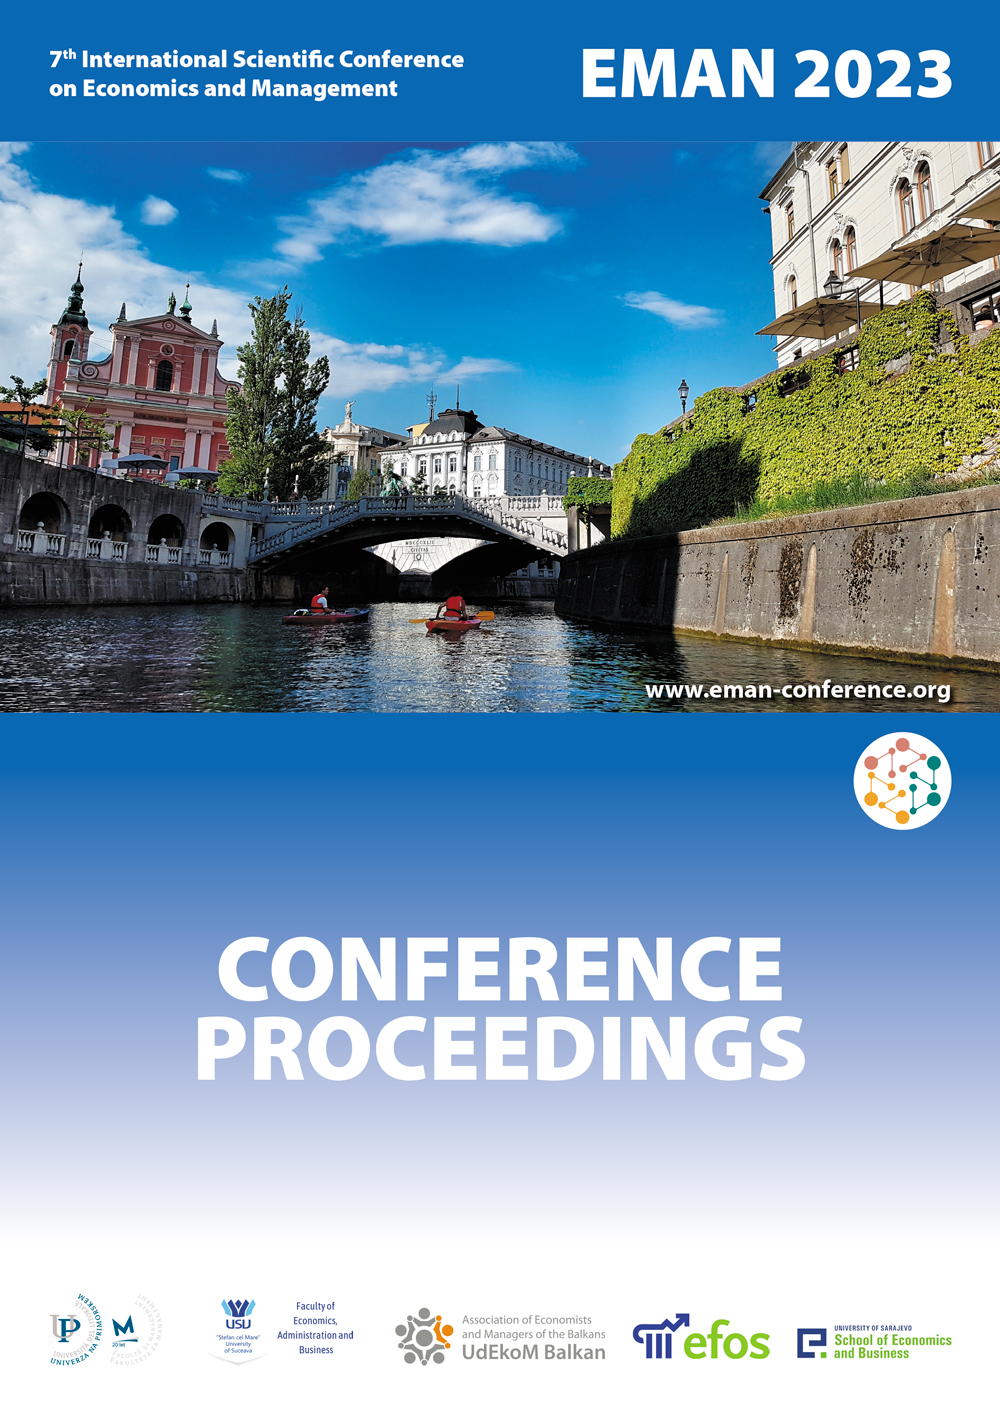 7th International Scientific Conference EMAN 2023 – Economics & Management: How to Cope with Disrupted Times, CONFERENCE PROCEEDINGS, Ljubljana, Slovenia (hybrid), March 23, 2023 Cover Image